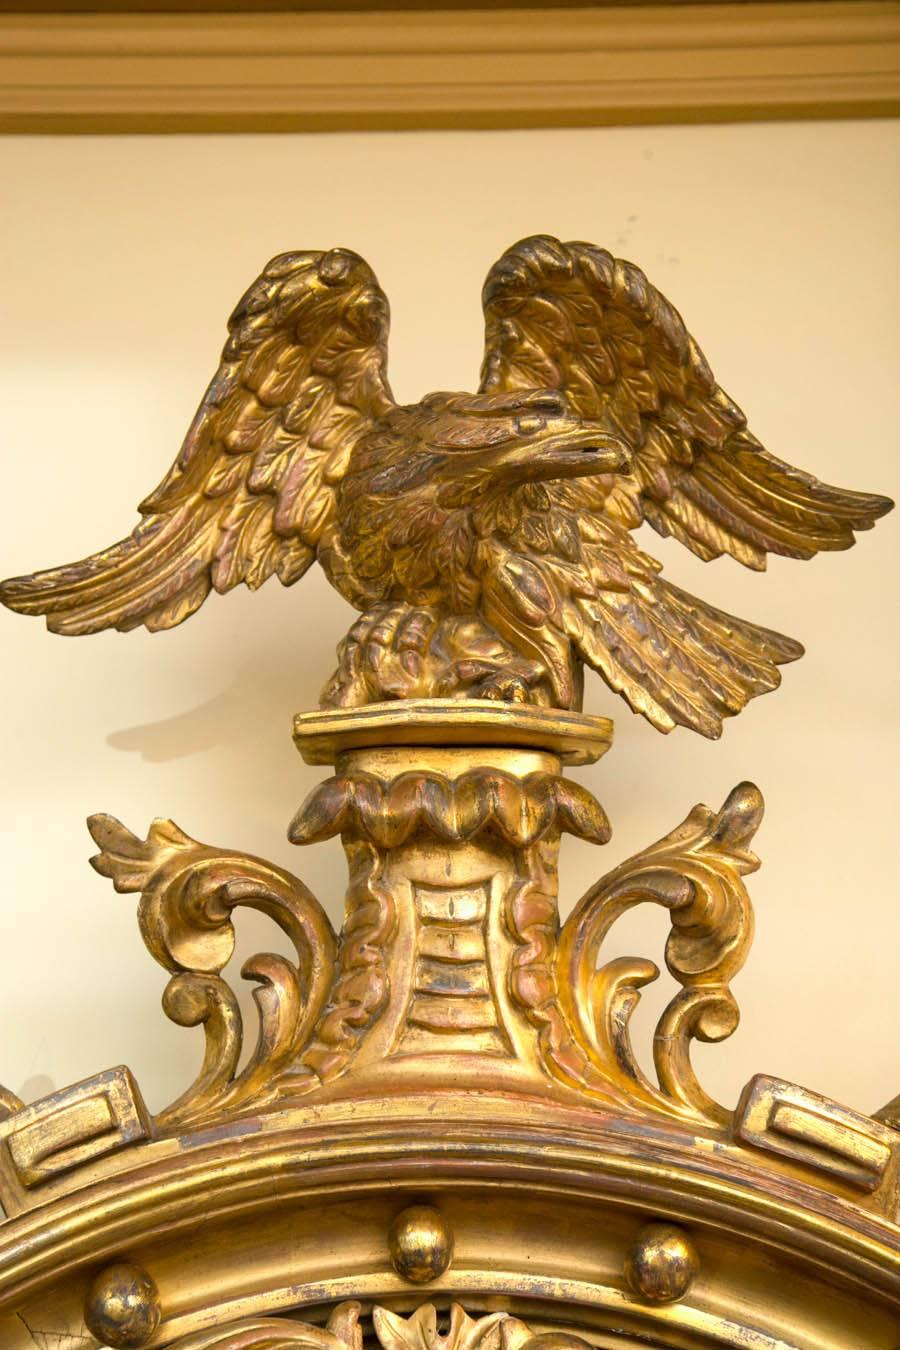 Early 19th century gilt-gesso and wood convex mirror, the crest with spread wing eagle perched on a plinth flanked by foliate devices, above the molded frame with applied spherules, a reticulated interior band of scrolling leaves and rosettes, and